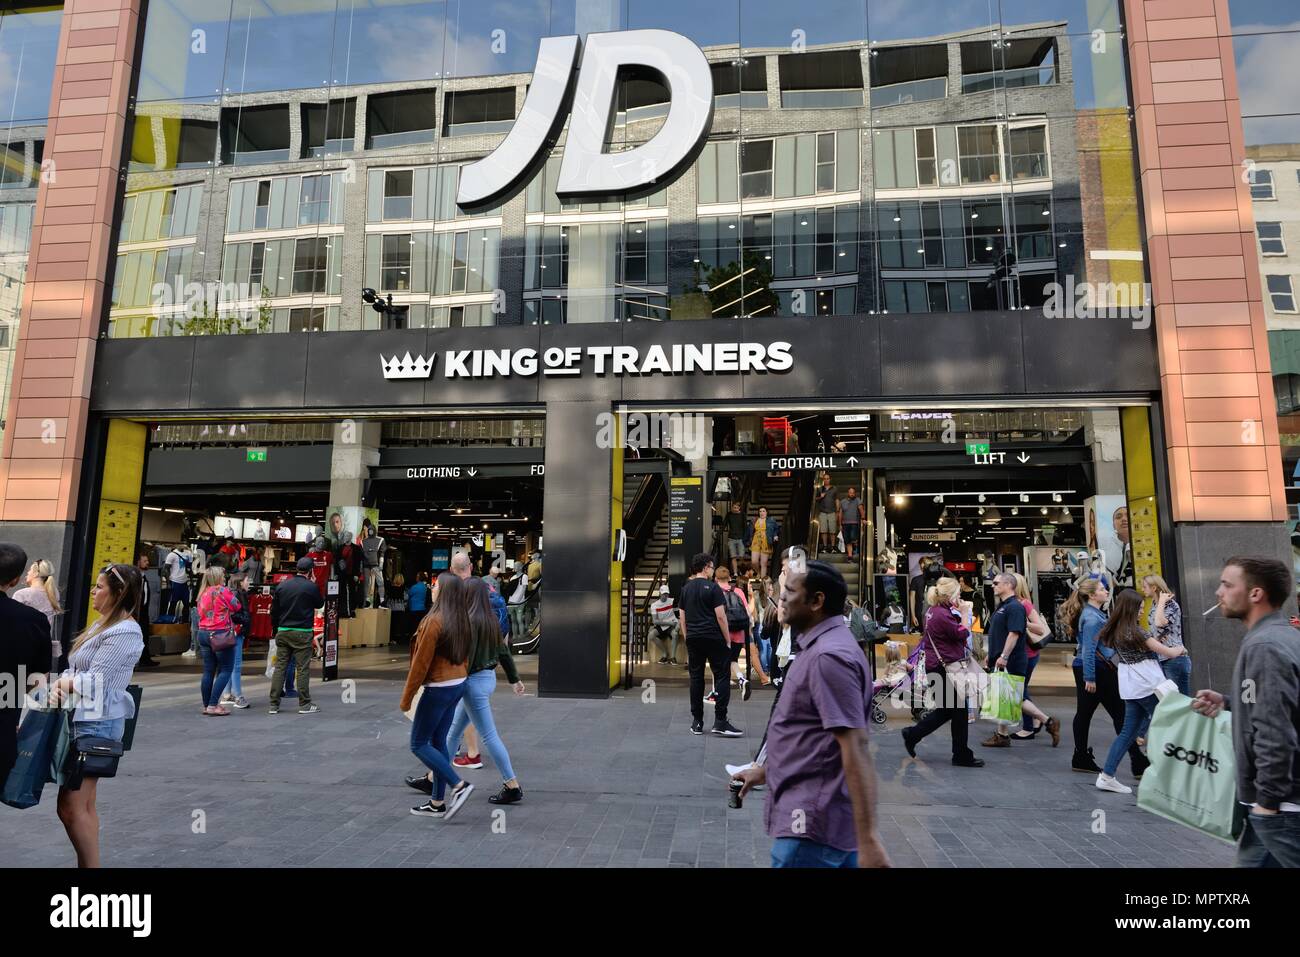 One of the many JD sports shops belonging to the Pentland group. This one is in Liverpool city centre, England, UK Stock Photo